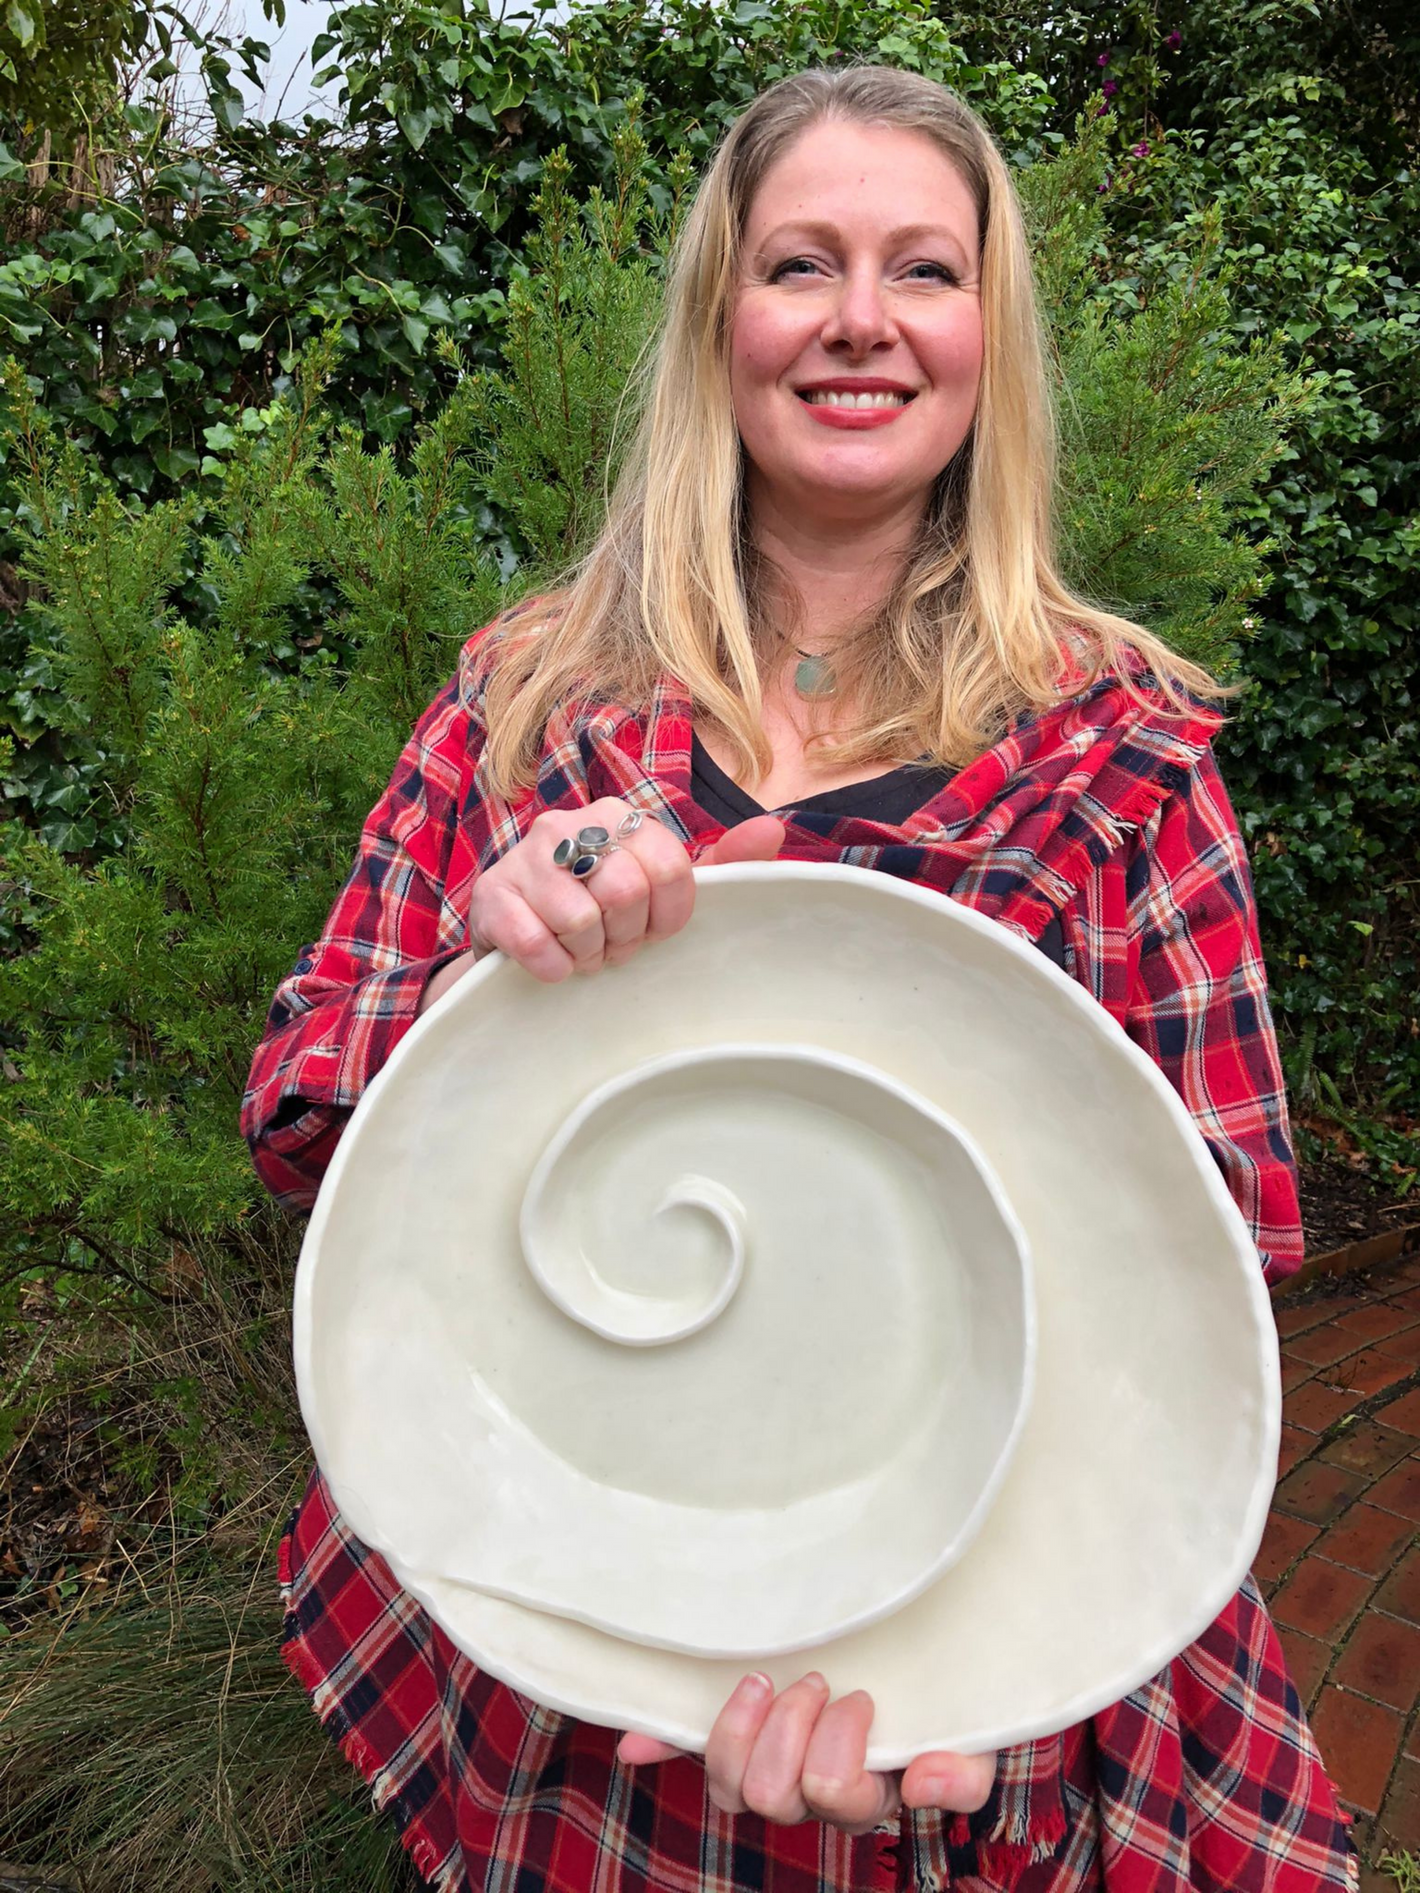 The Arthly Box collaboration with Monika with a K Ceramics Mornington Peninsula Victoria Australia. Handmade ceramics, pinch bowls for your kitchen or for gifting.